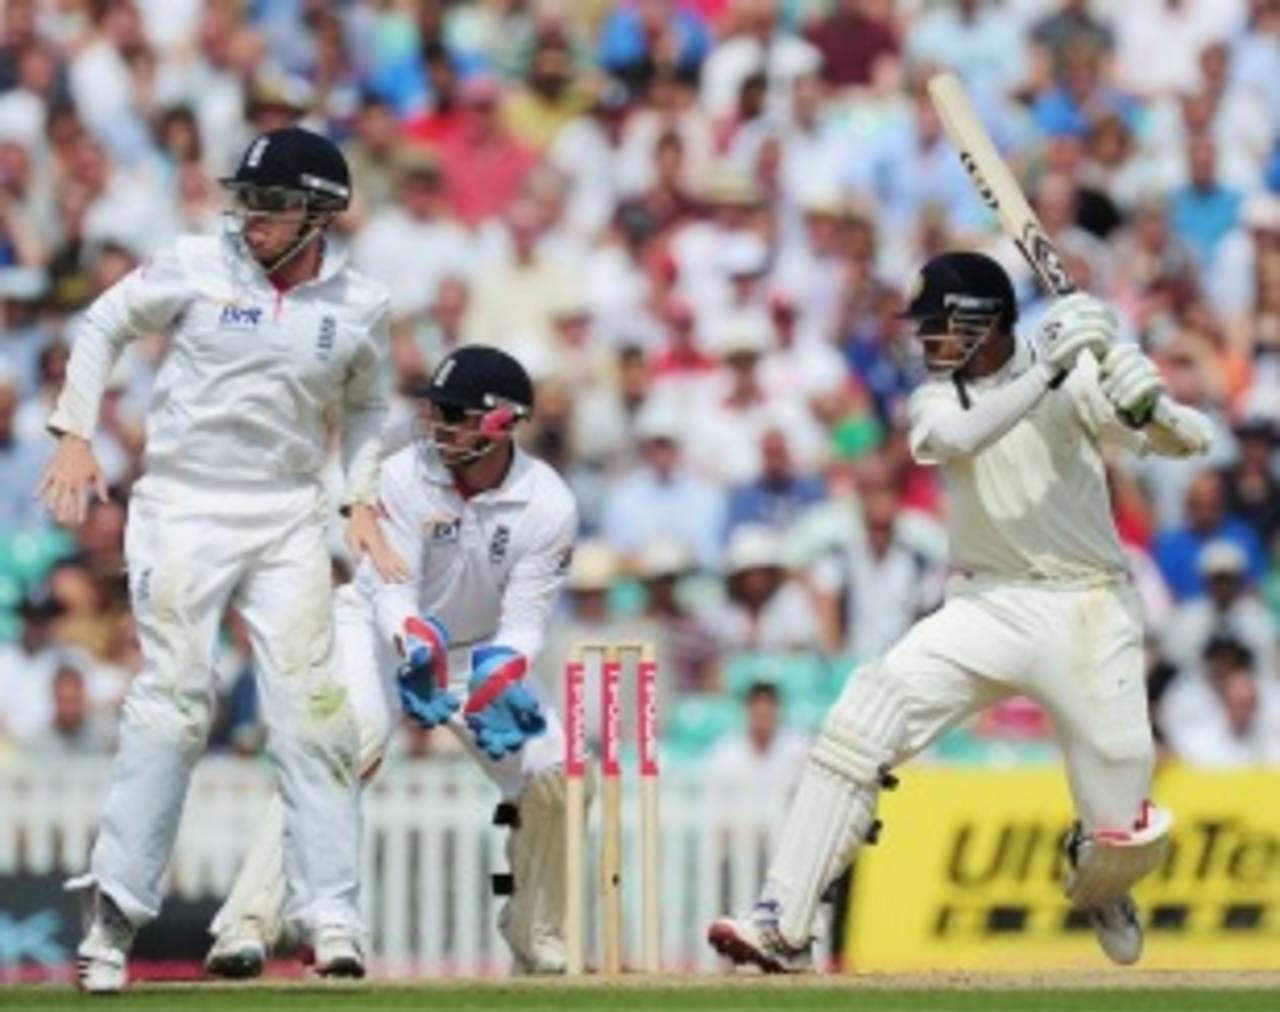 Rahul Dravid cuts during his hundred, England v India, 4th Test, The Oval, 4th day, August 21, 2011